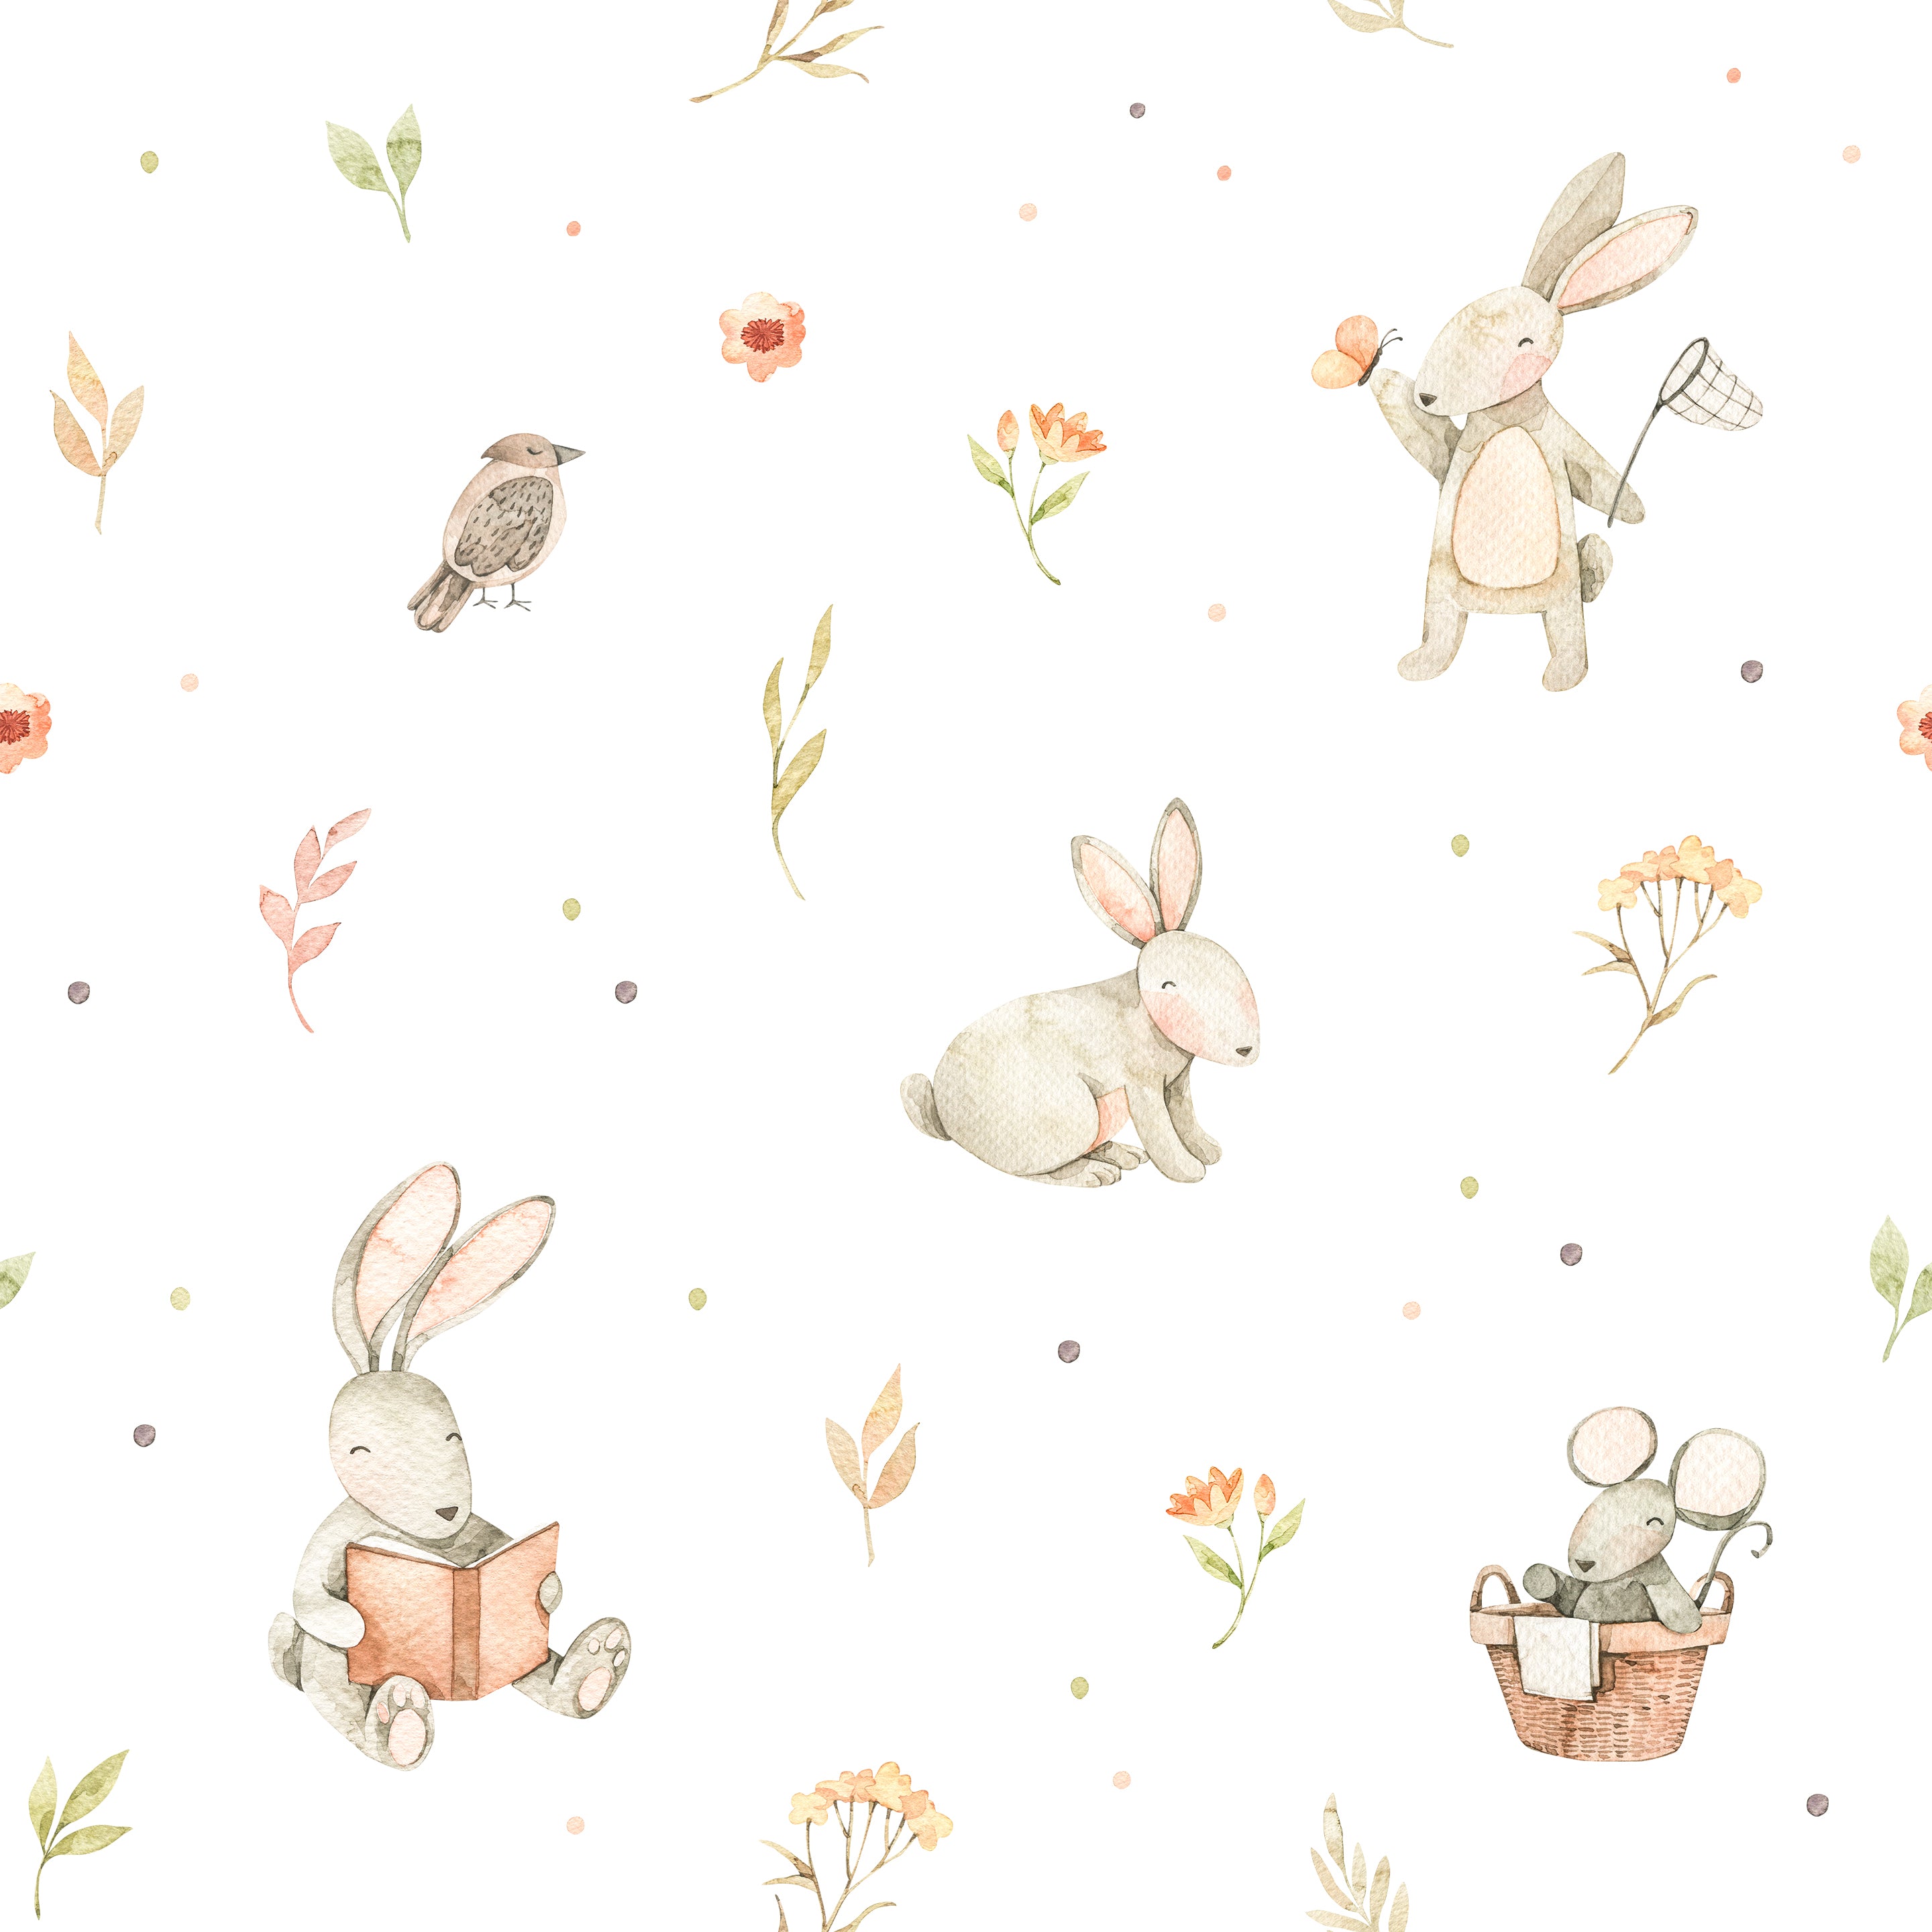 A charming pattern featuring watercolor bunnies in various activities, such as reading and playing, along with birds, flowers, and leaves, all set against a white background with colorful dots. The design evokes a sense of a peaceful, natural world filled with wonder.